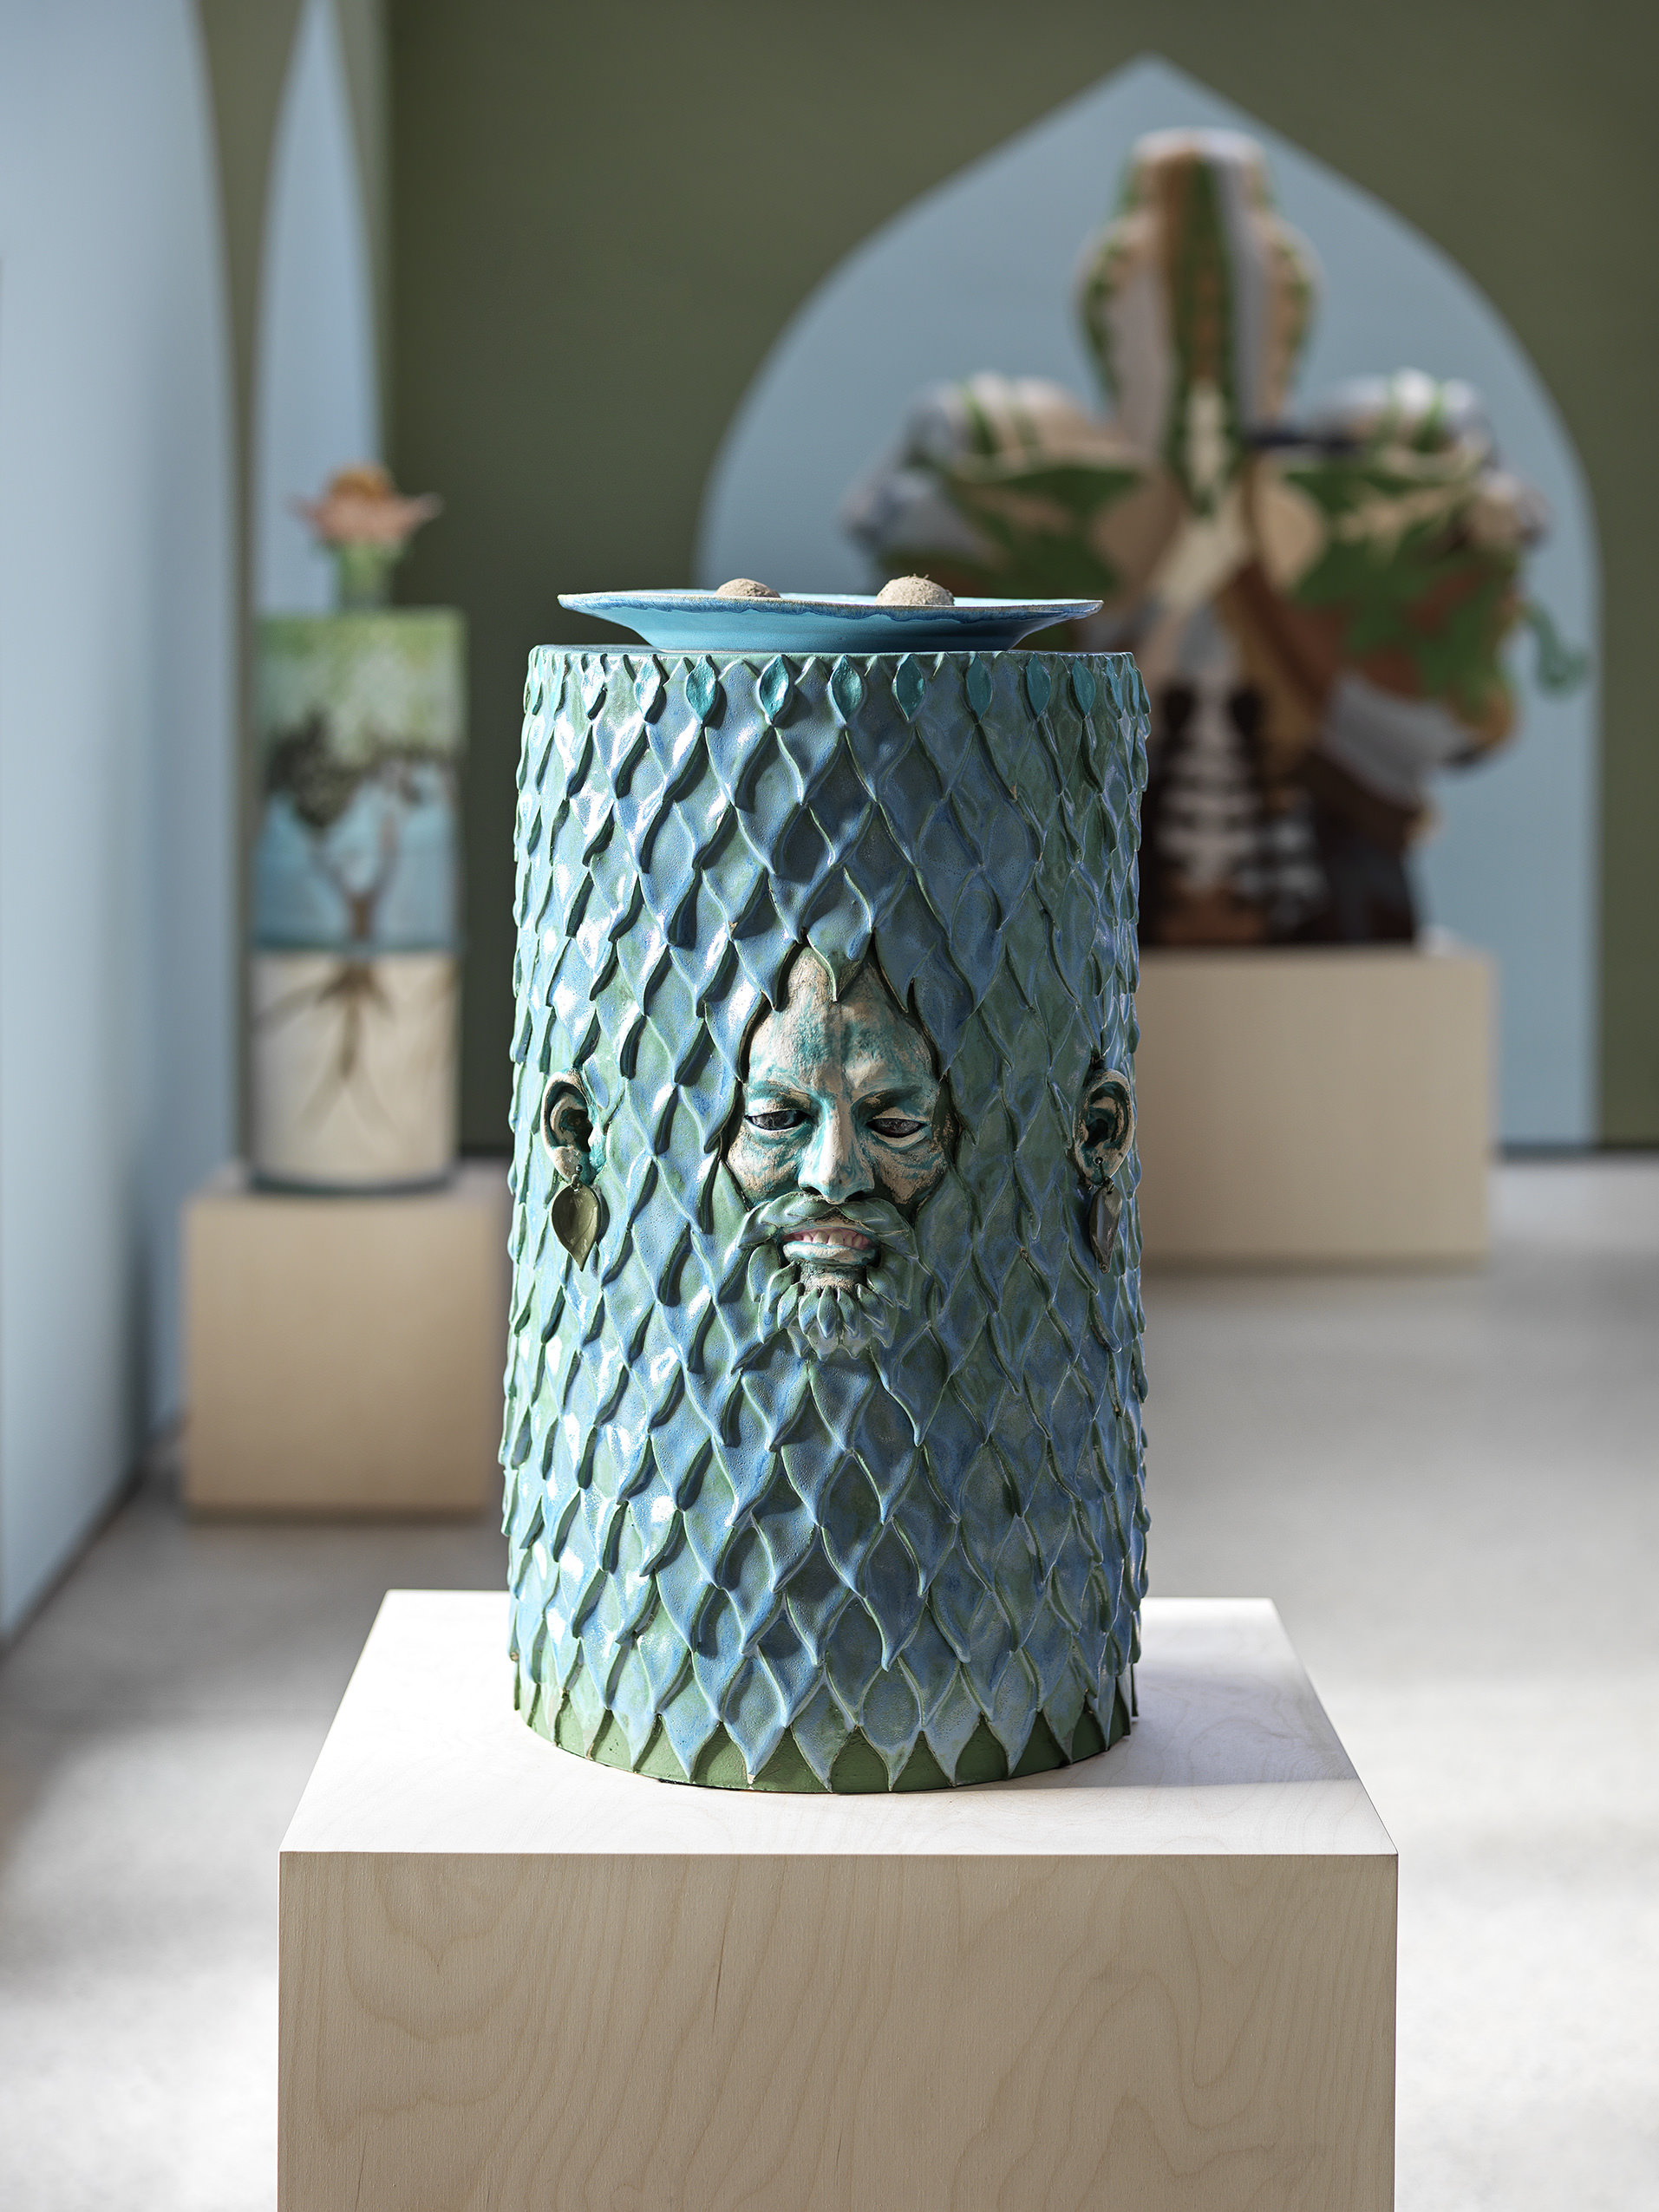 A turquoise cylindrical ceramic work with a face emerging from it.